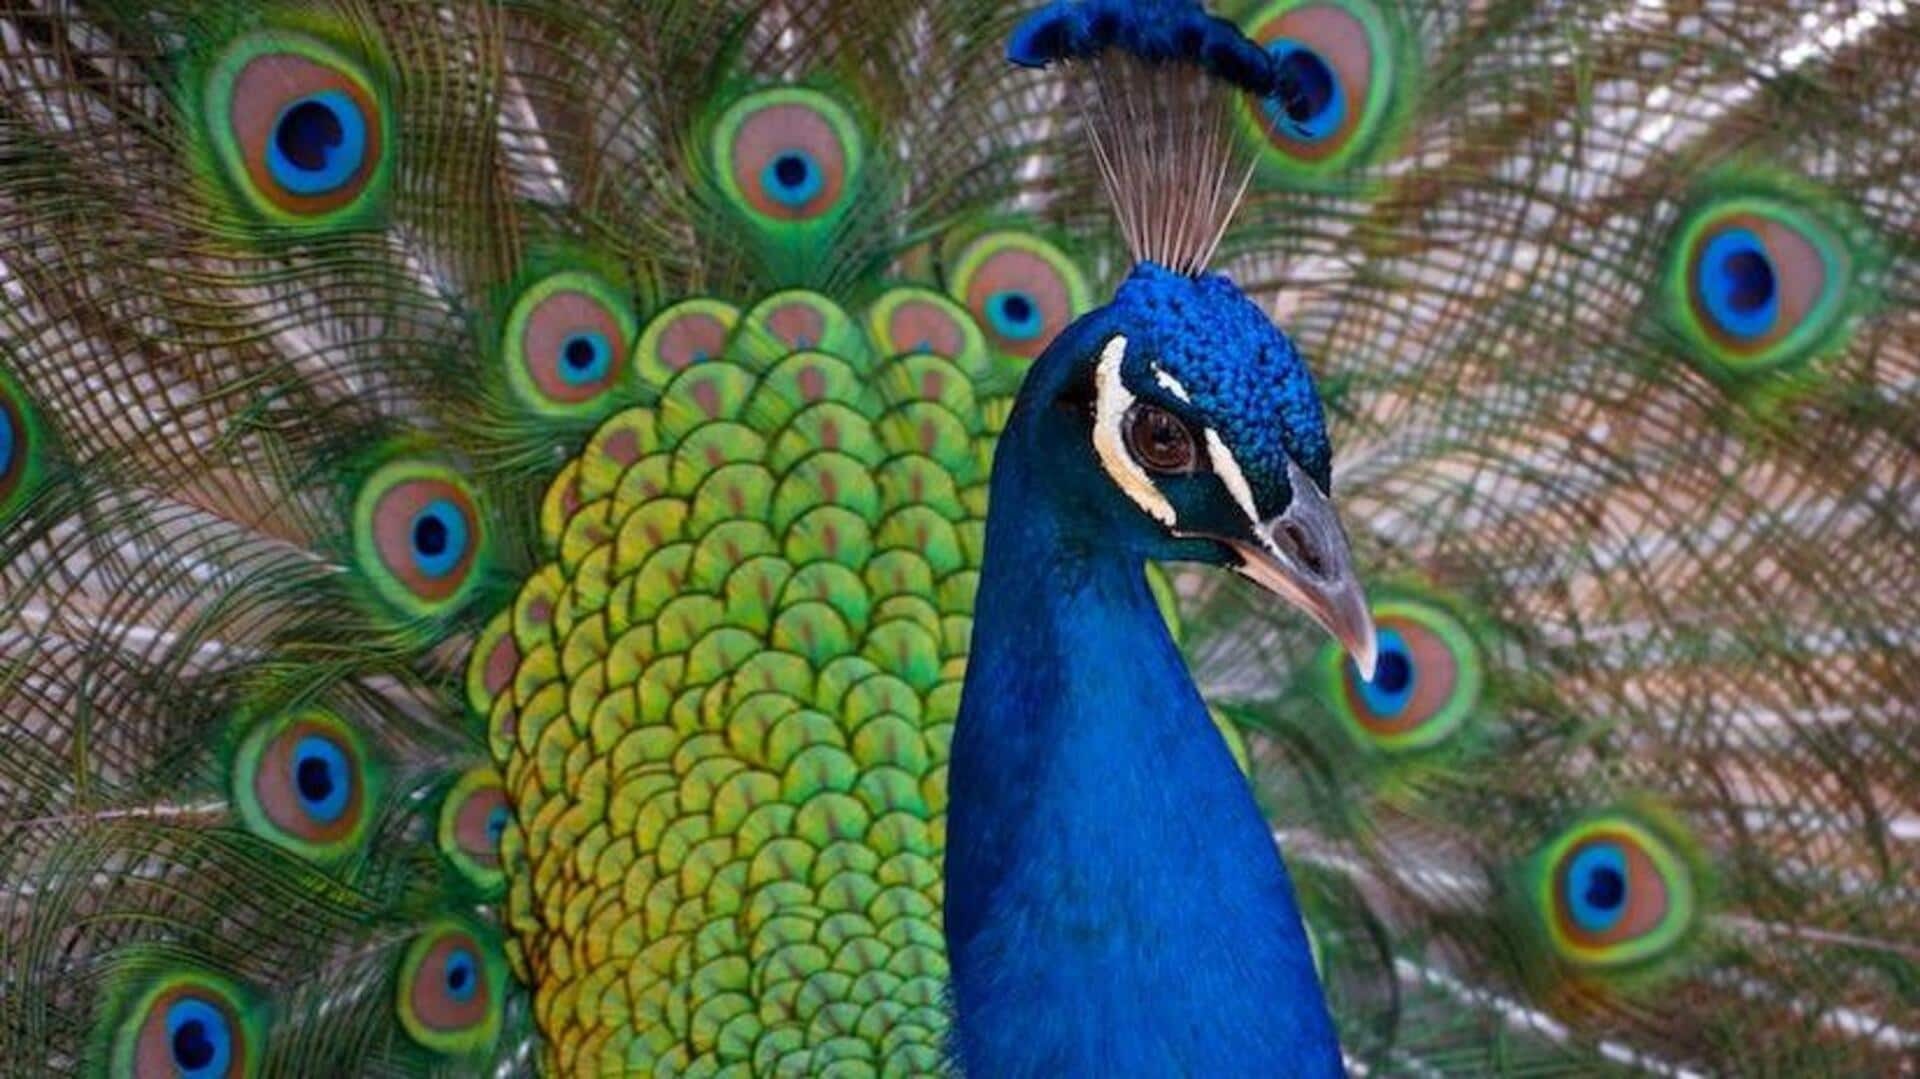 Facts about peacocks you probably didn't know